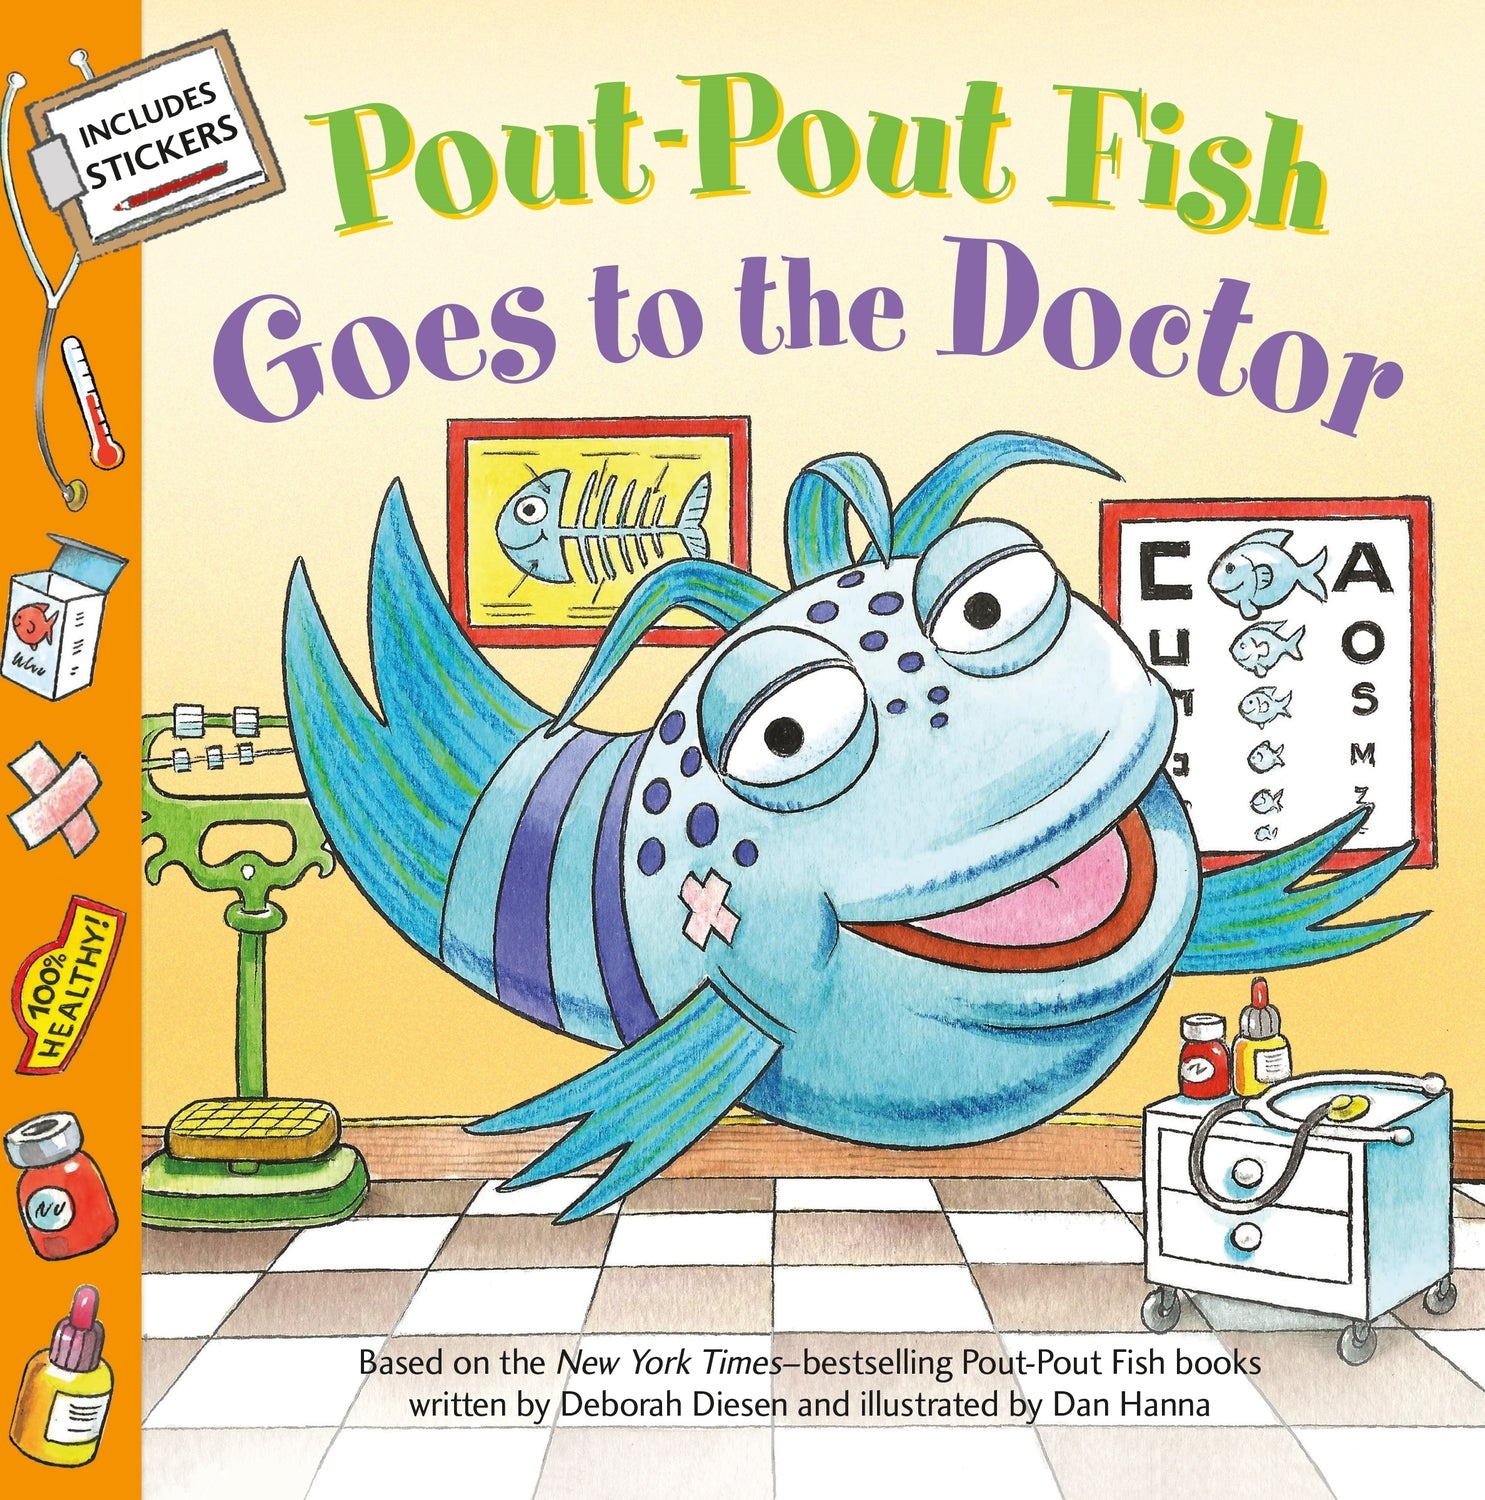 Pout-Pout Fish: Goes to the Doctor